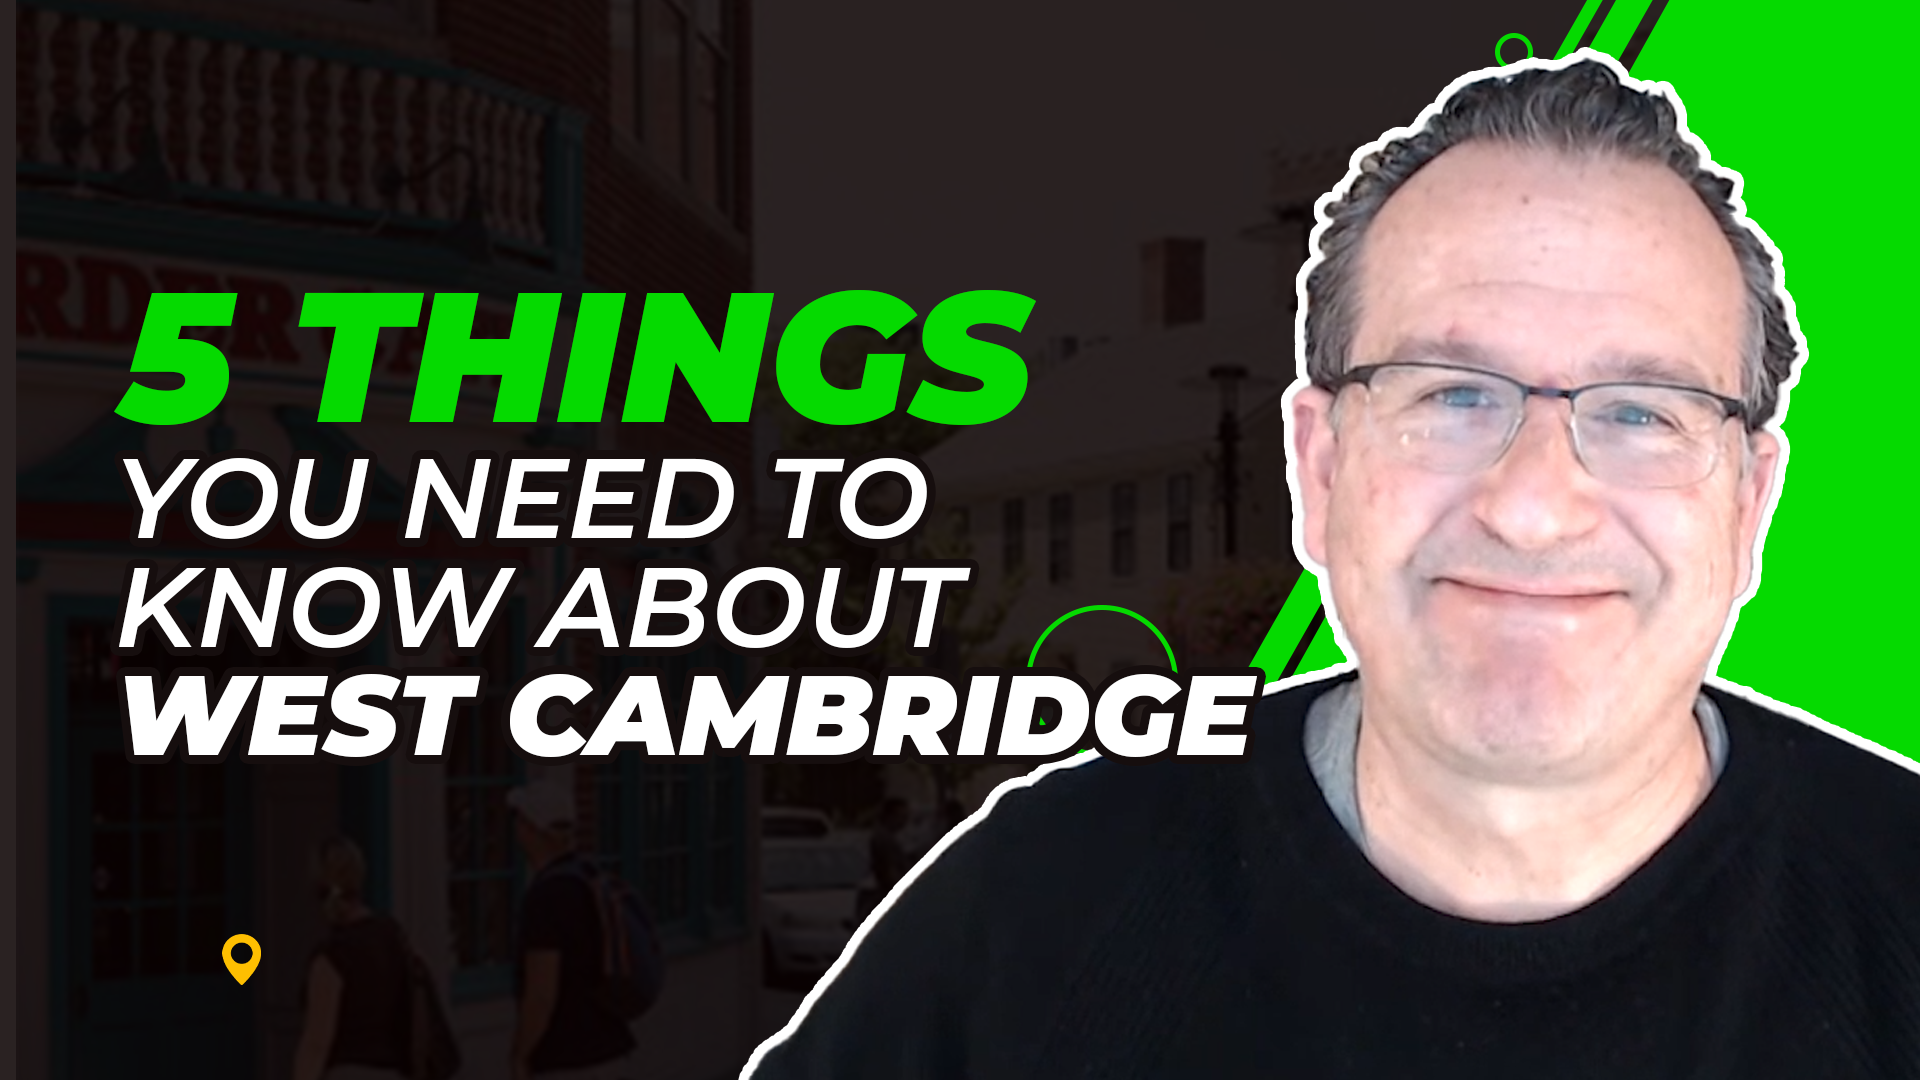 5 Things to know about West Cambridge